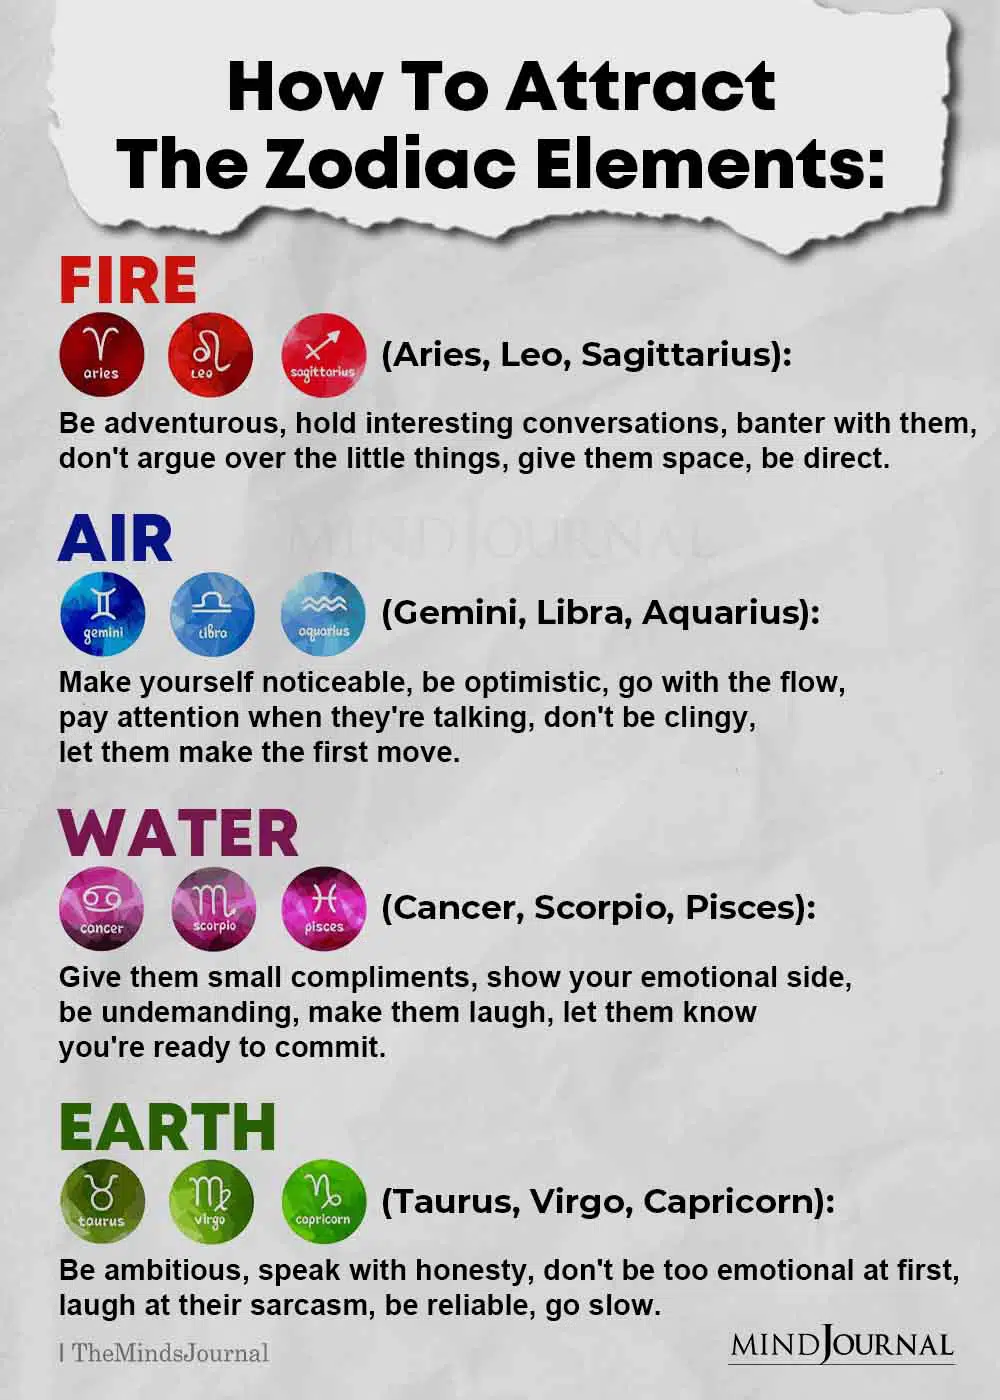 How to Attract the Zodiac Elements